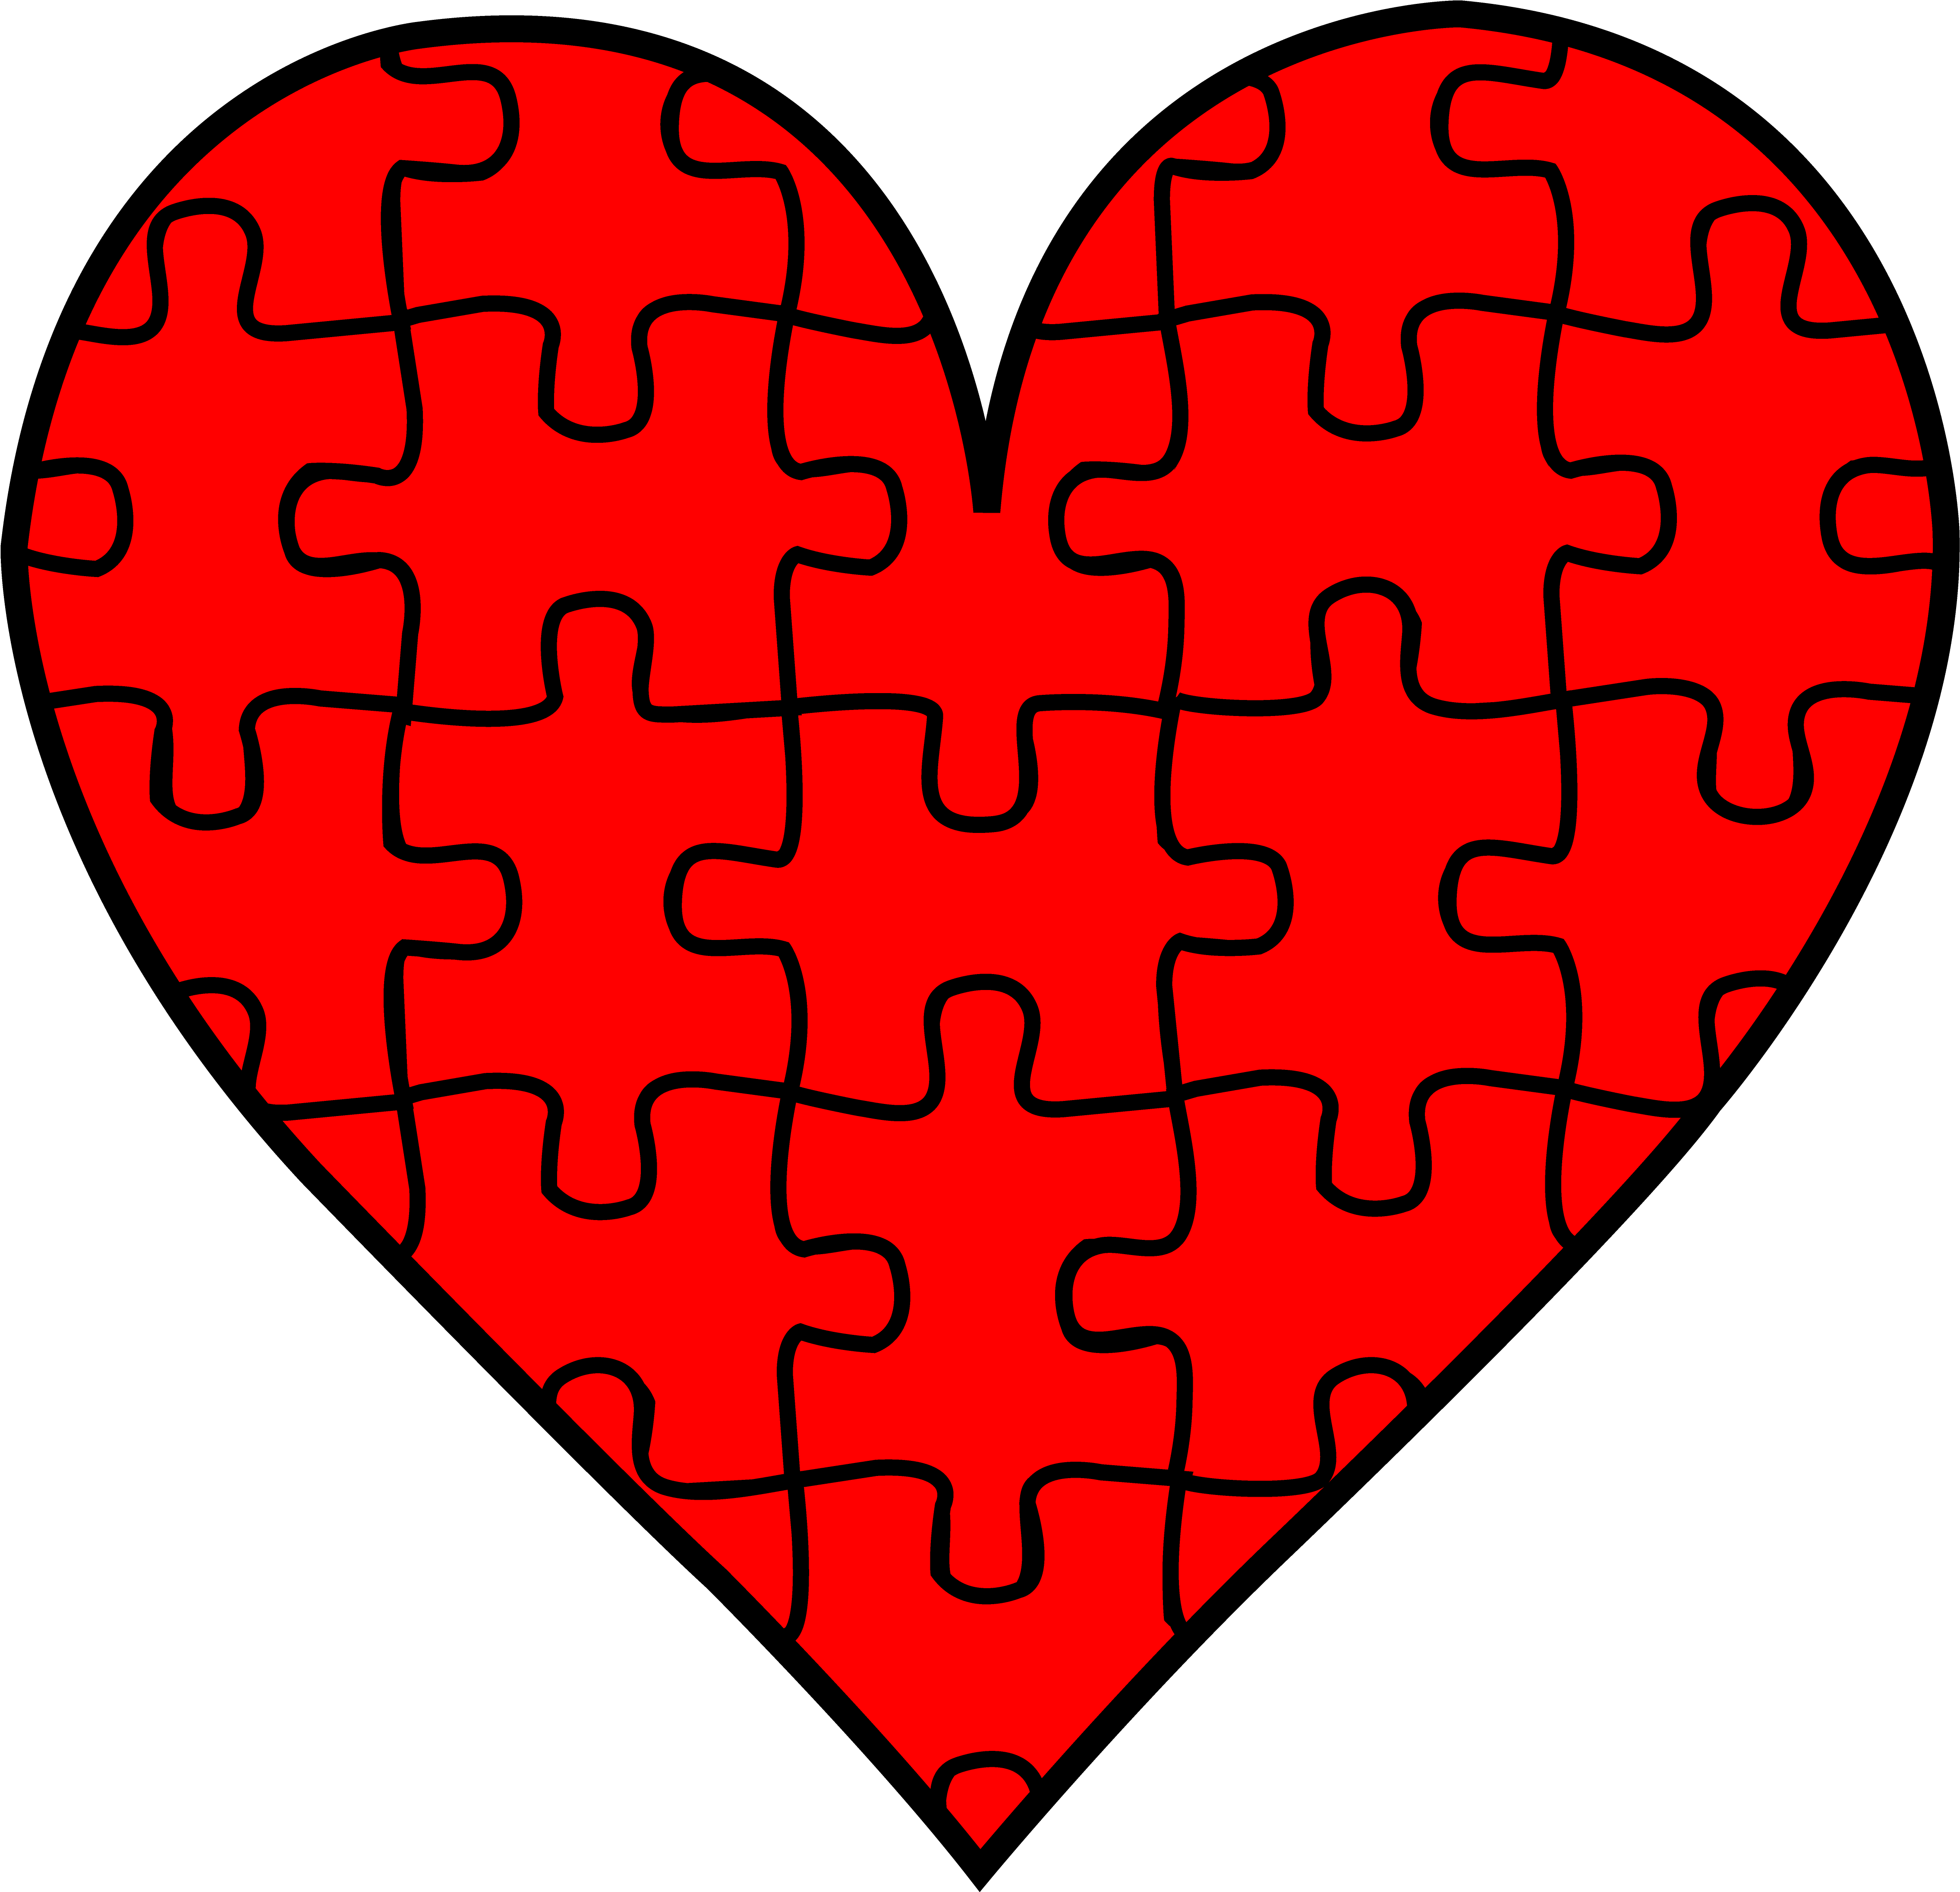 Red Heart With Puzzle Pieces - Heart With Puzzle Pieces (4861x4694)